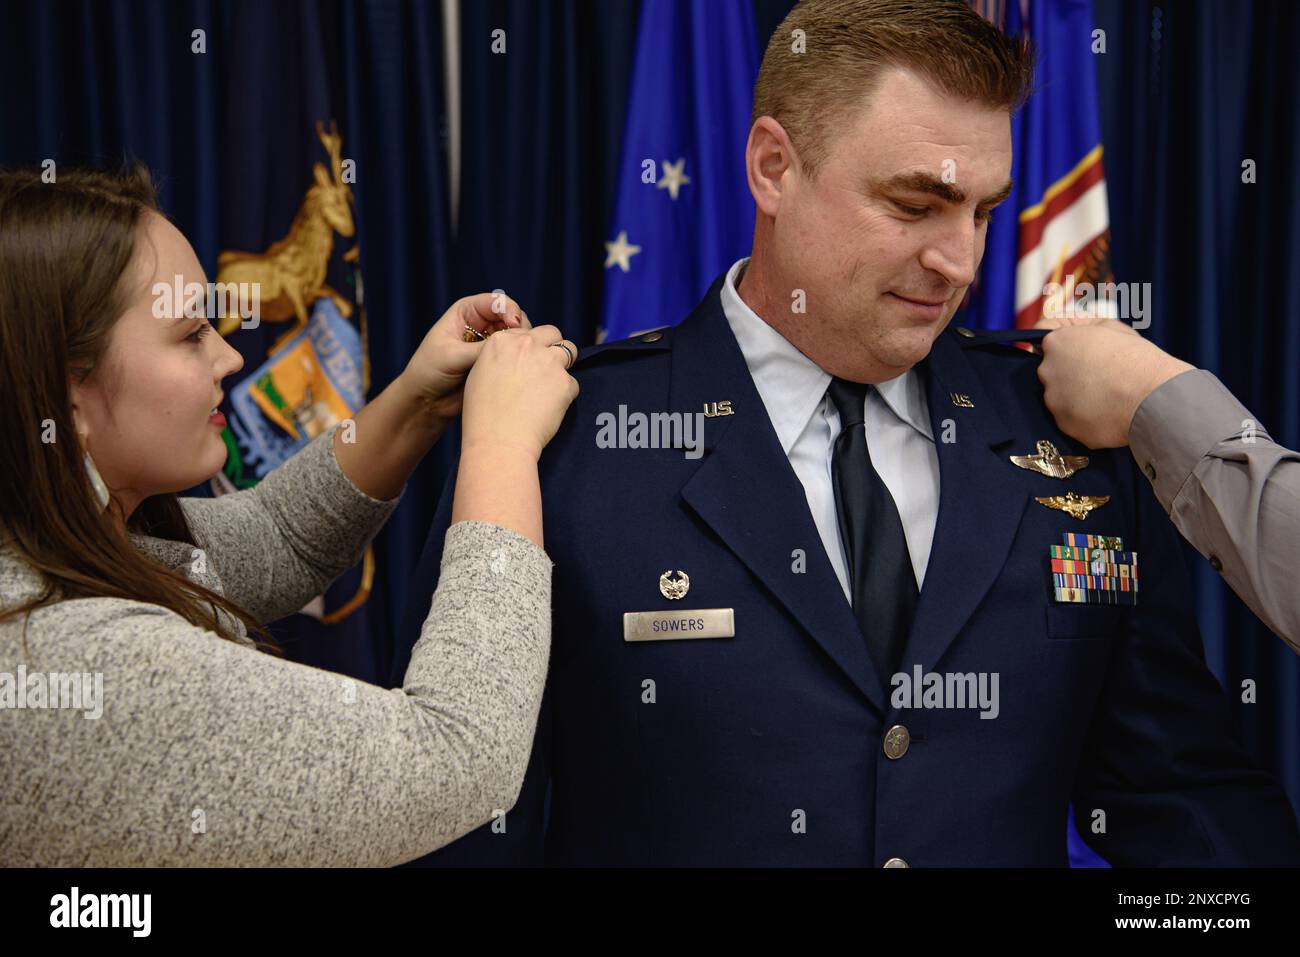 U.S. Air Force Lt. Col. David Sowers, 110th Wing Operations Group  commander, is promoted to the